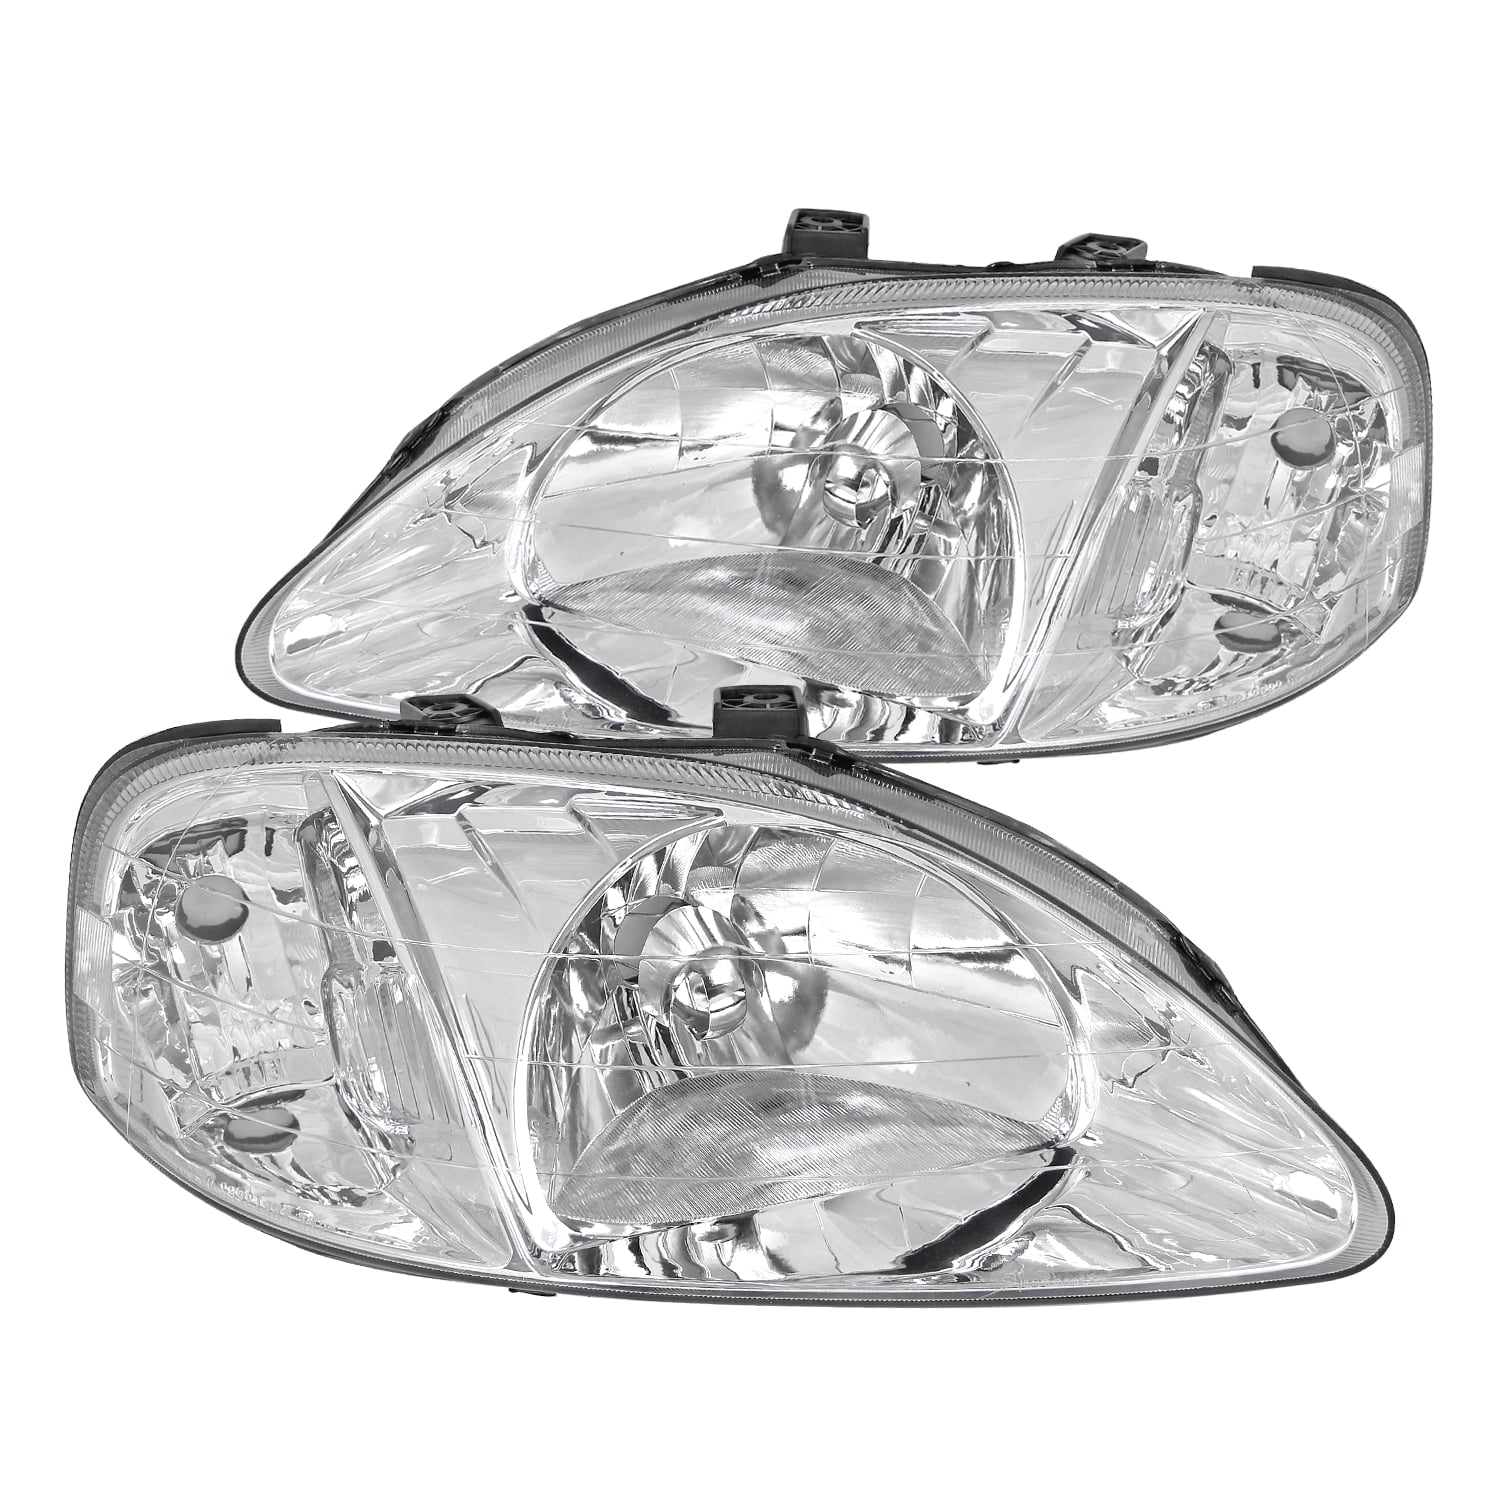 Fit 99-00 Honda Civic Clear Lens Headlights Head Lights Lamps Left+Right Pair 